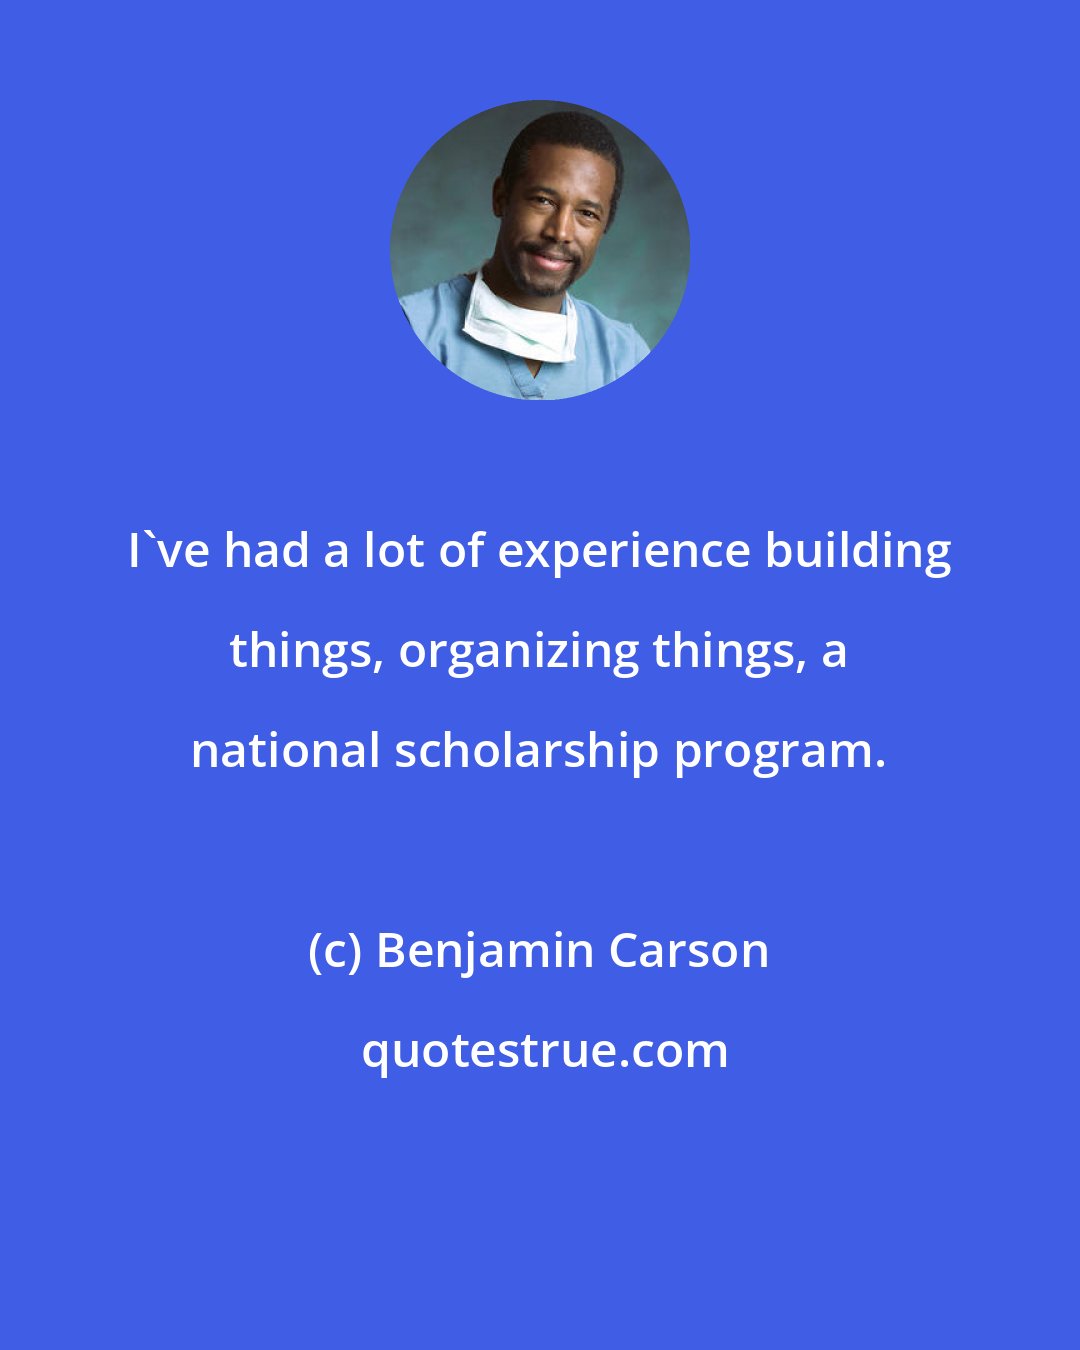 Benjamin Carson: I've had a lot of experience building things, organizing things, a national scholarship program.